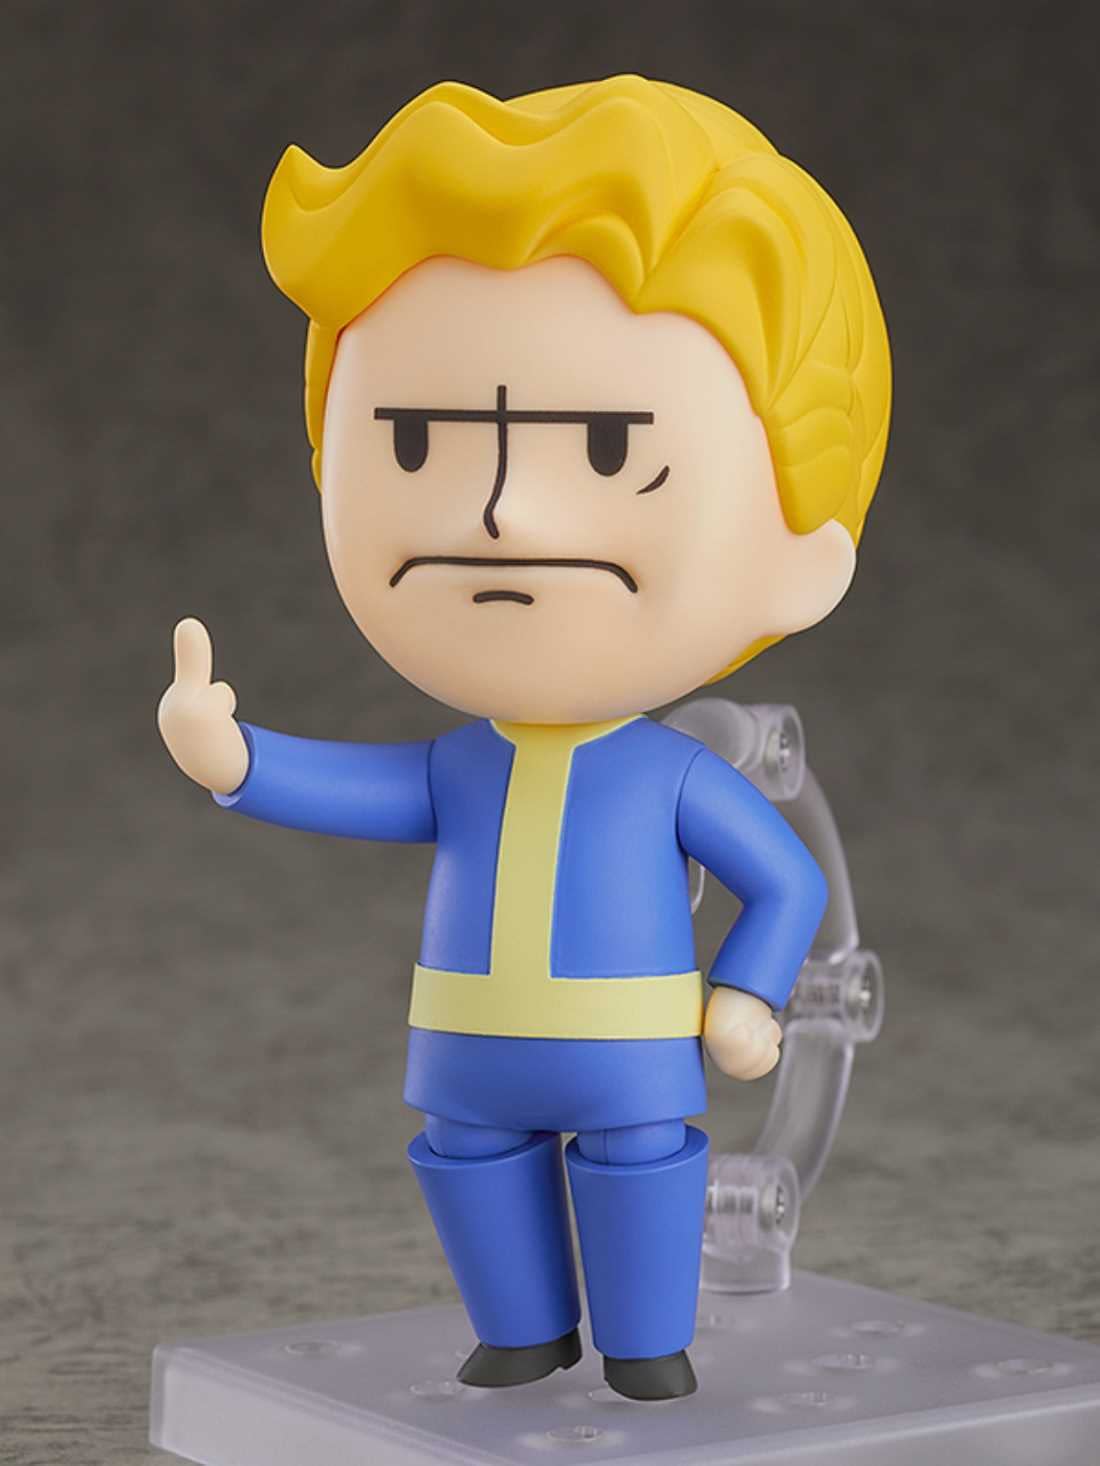 Leave the Vault with "Fallout" Vault Boy from Good Smile Company